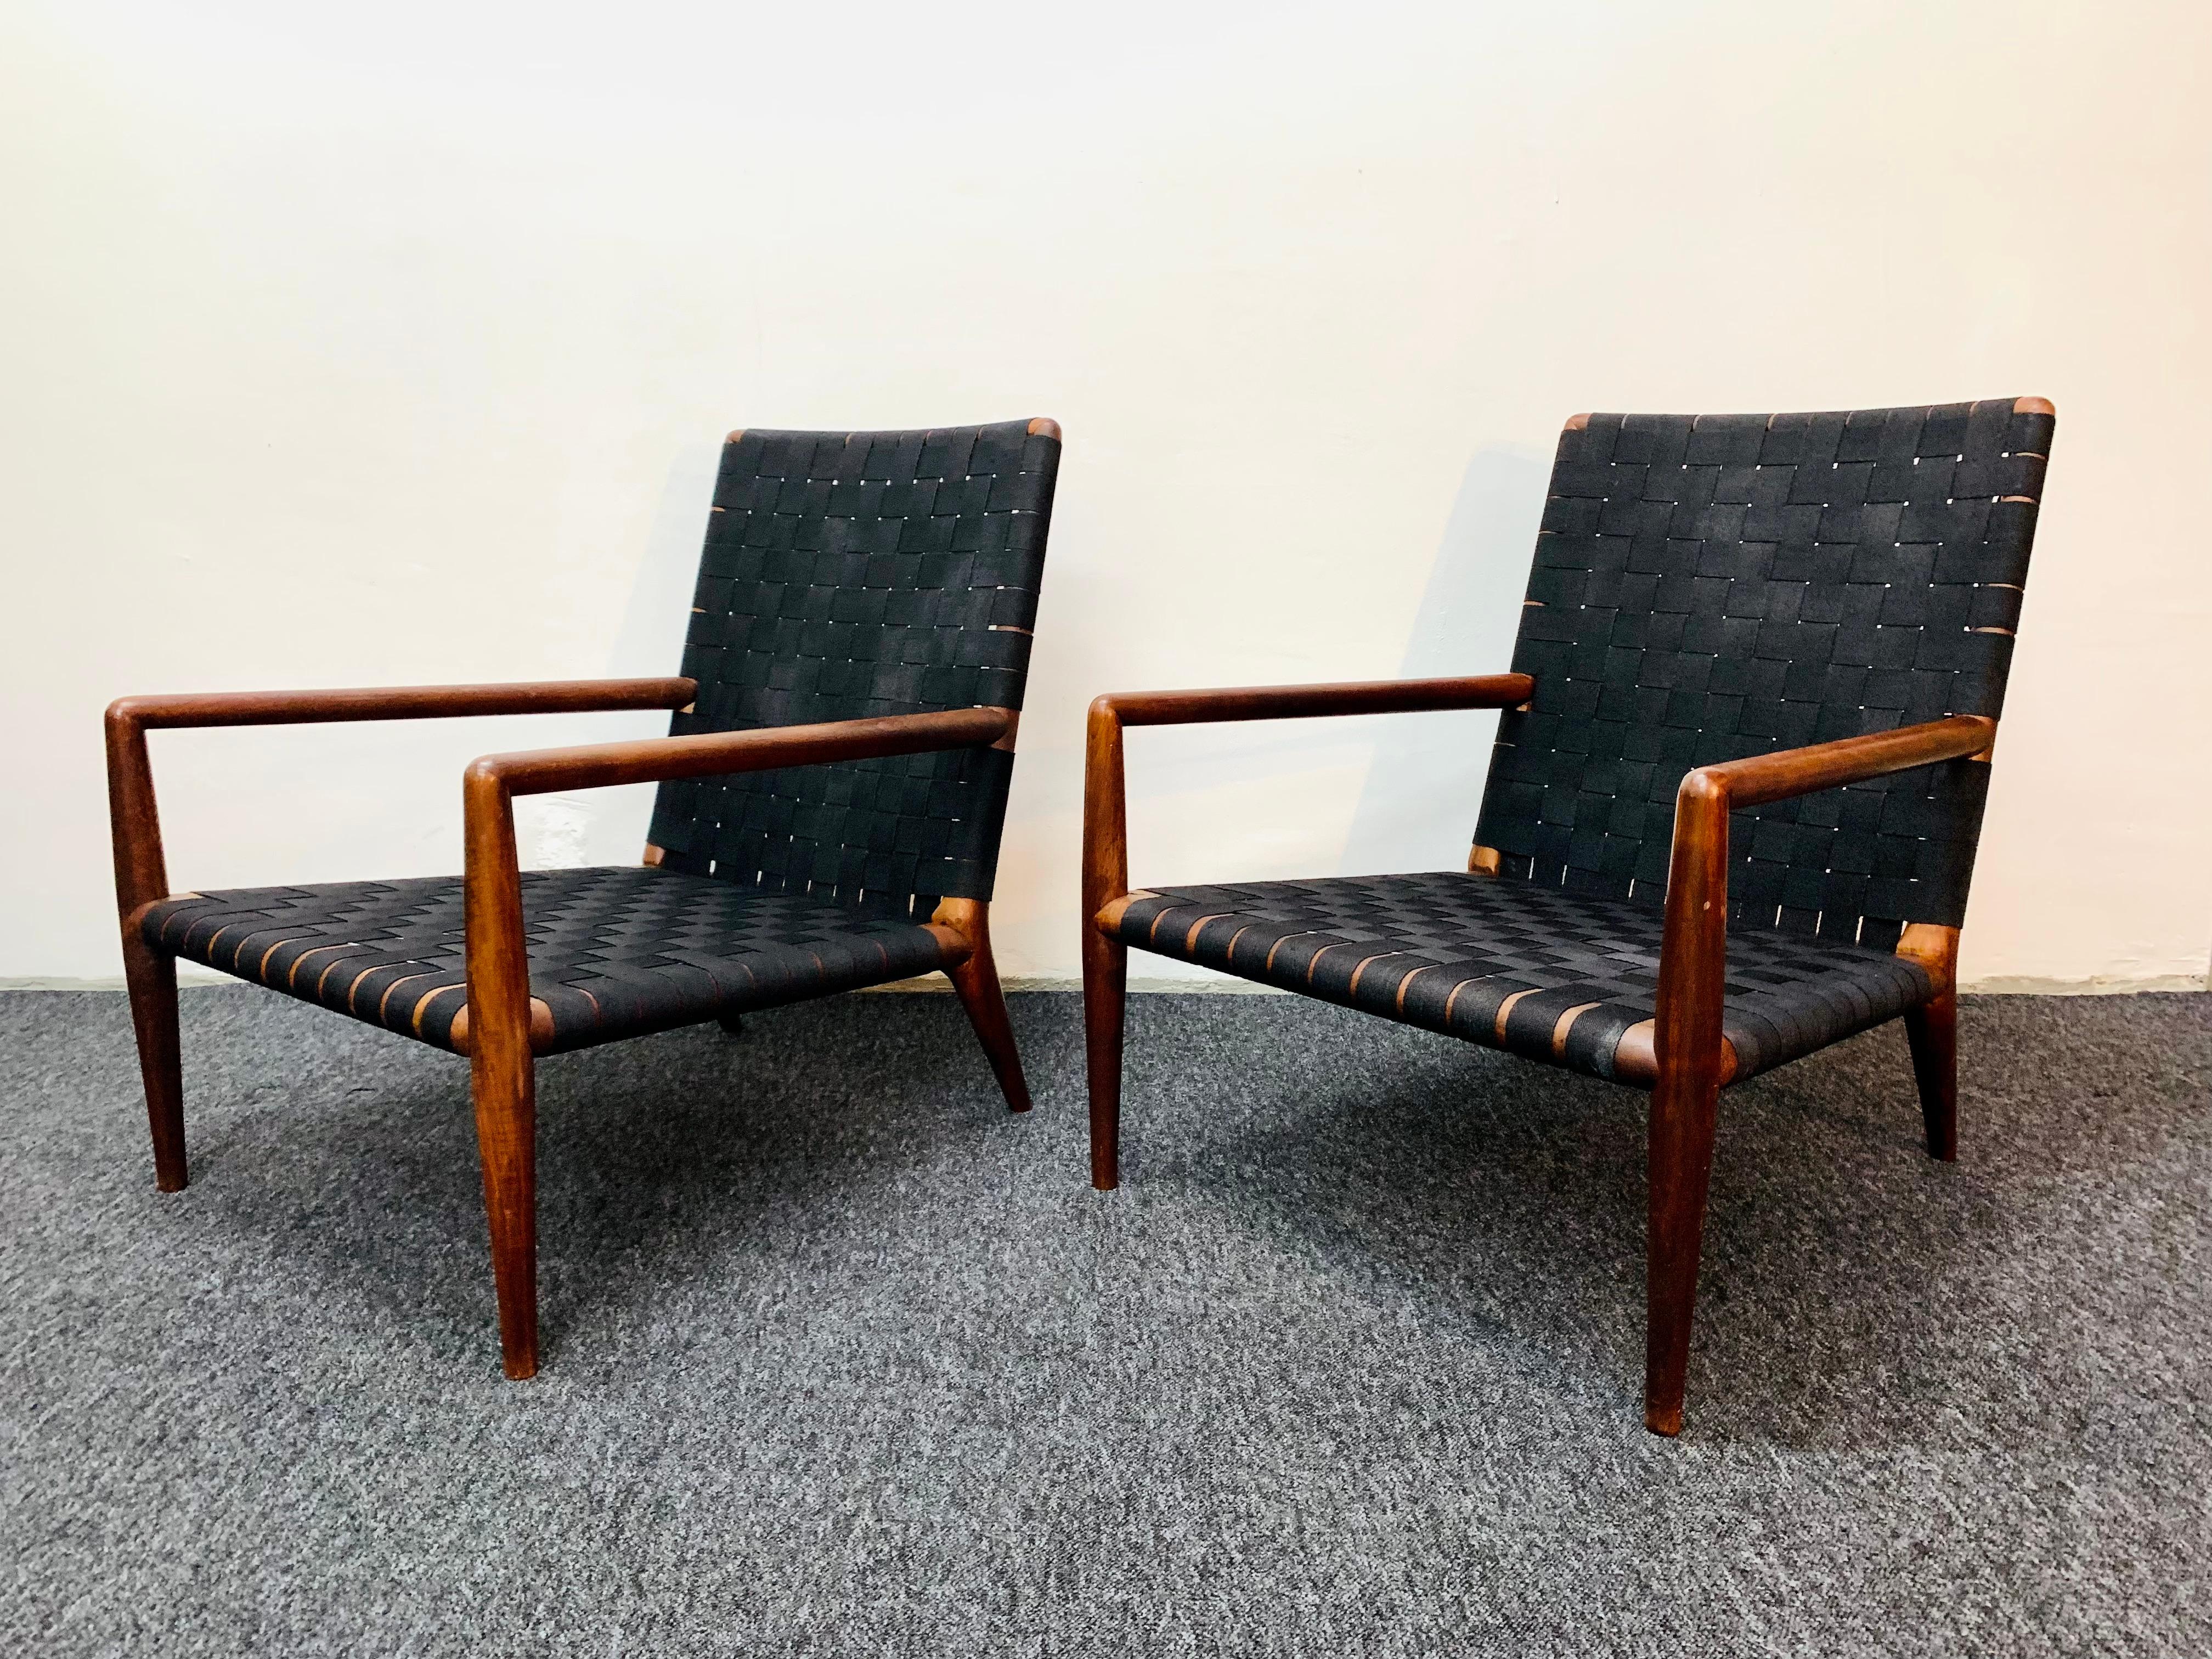 Wonderful and very comfortable American armchairs from the 1950s.
The delicate design fits wonderfully into any interior and is an enrichment for every home.
The noble walnut wood ensures an elegant look.

Design: T.H. Robsjohn